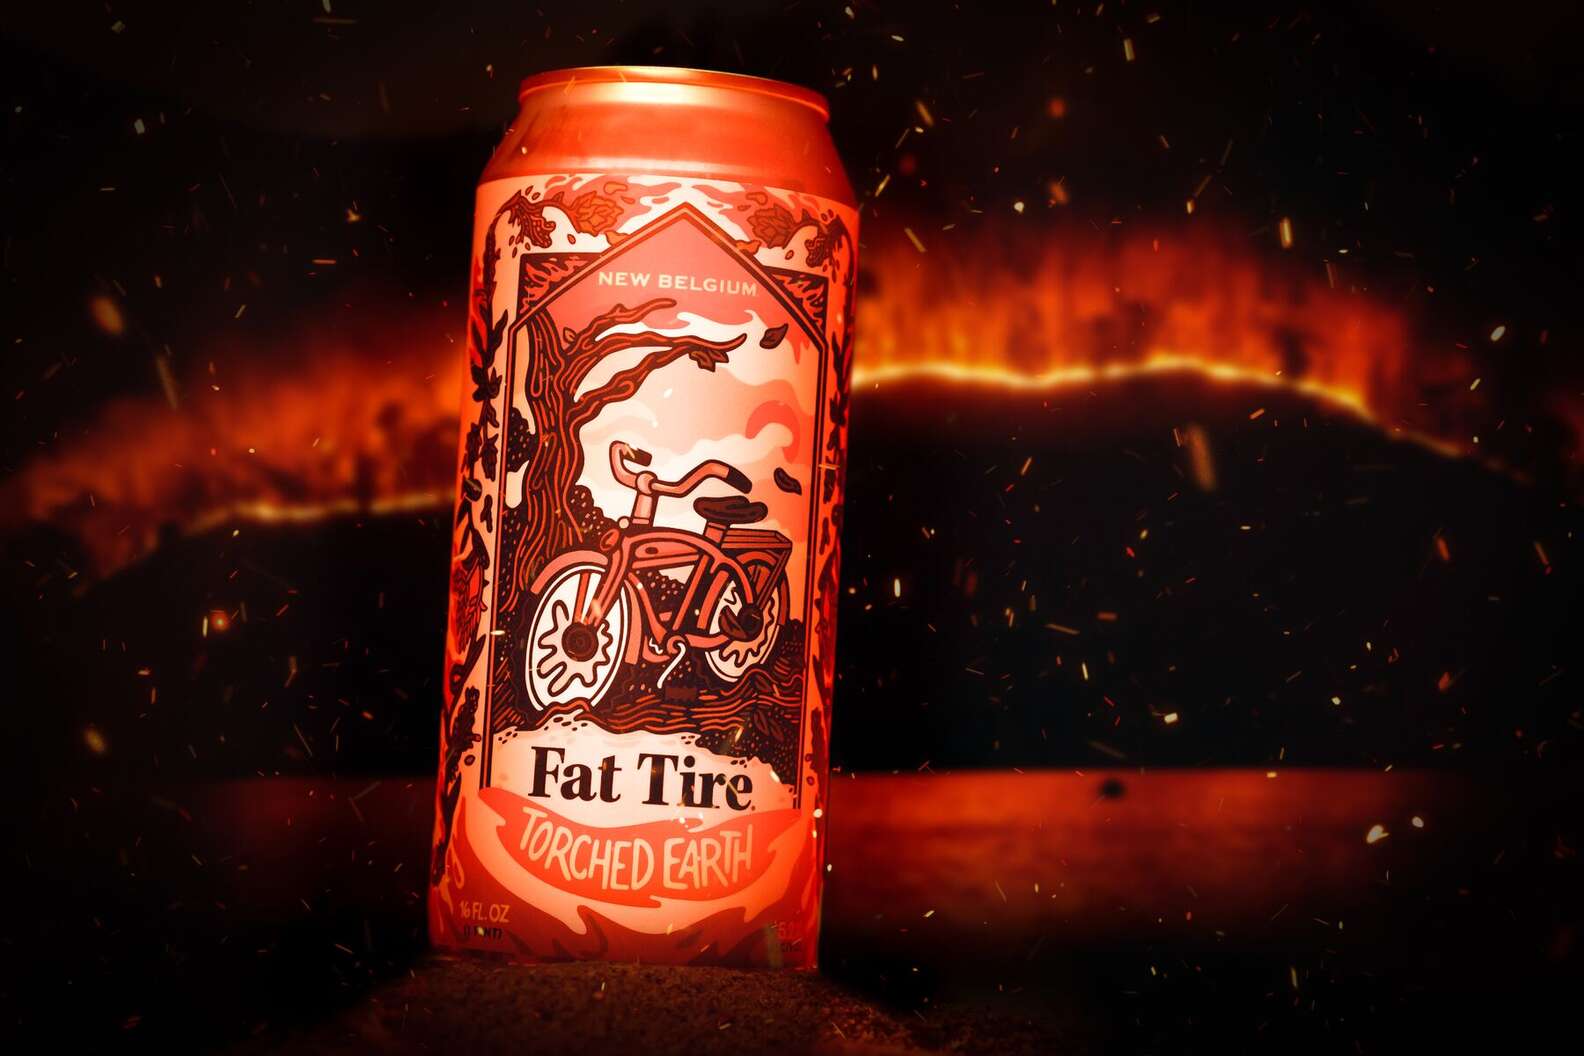 torched earth beer